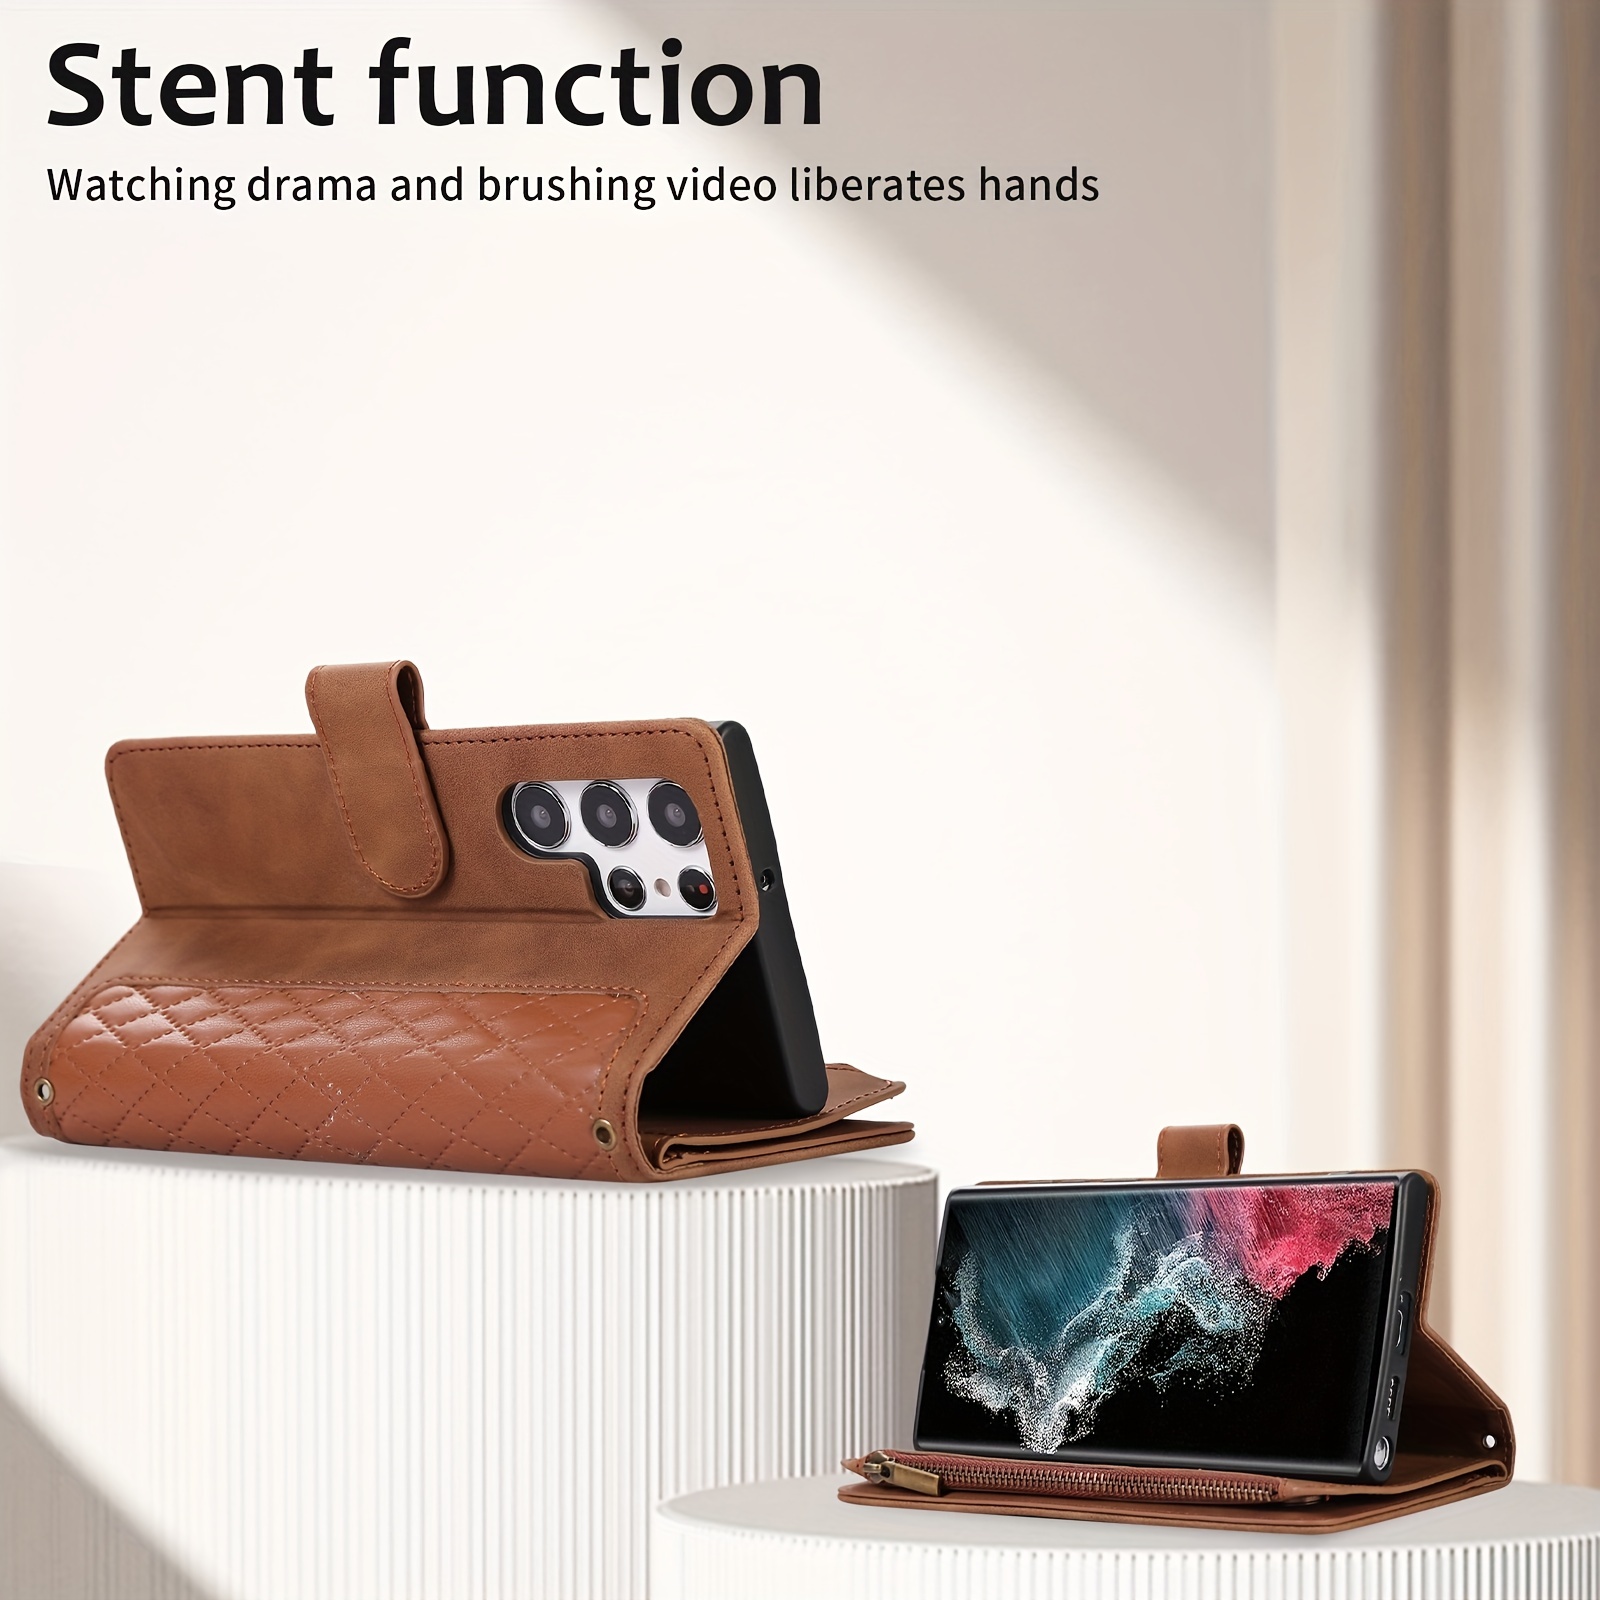 Lattice Brown Leather Sheath Phone Case For S23 S22 S21 Ultra S23 S22 S21  S20 Plus S23 S22 S21 S20 A52 A71 A72 A22 A32 A21s S20 Fe S10 Plus Note 10